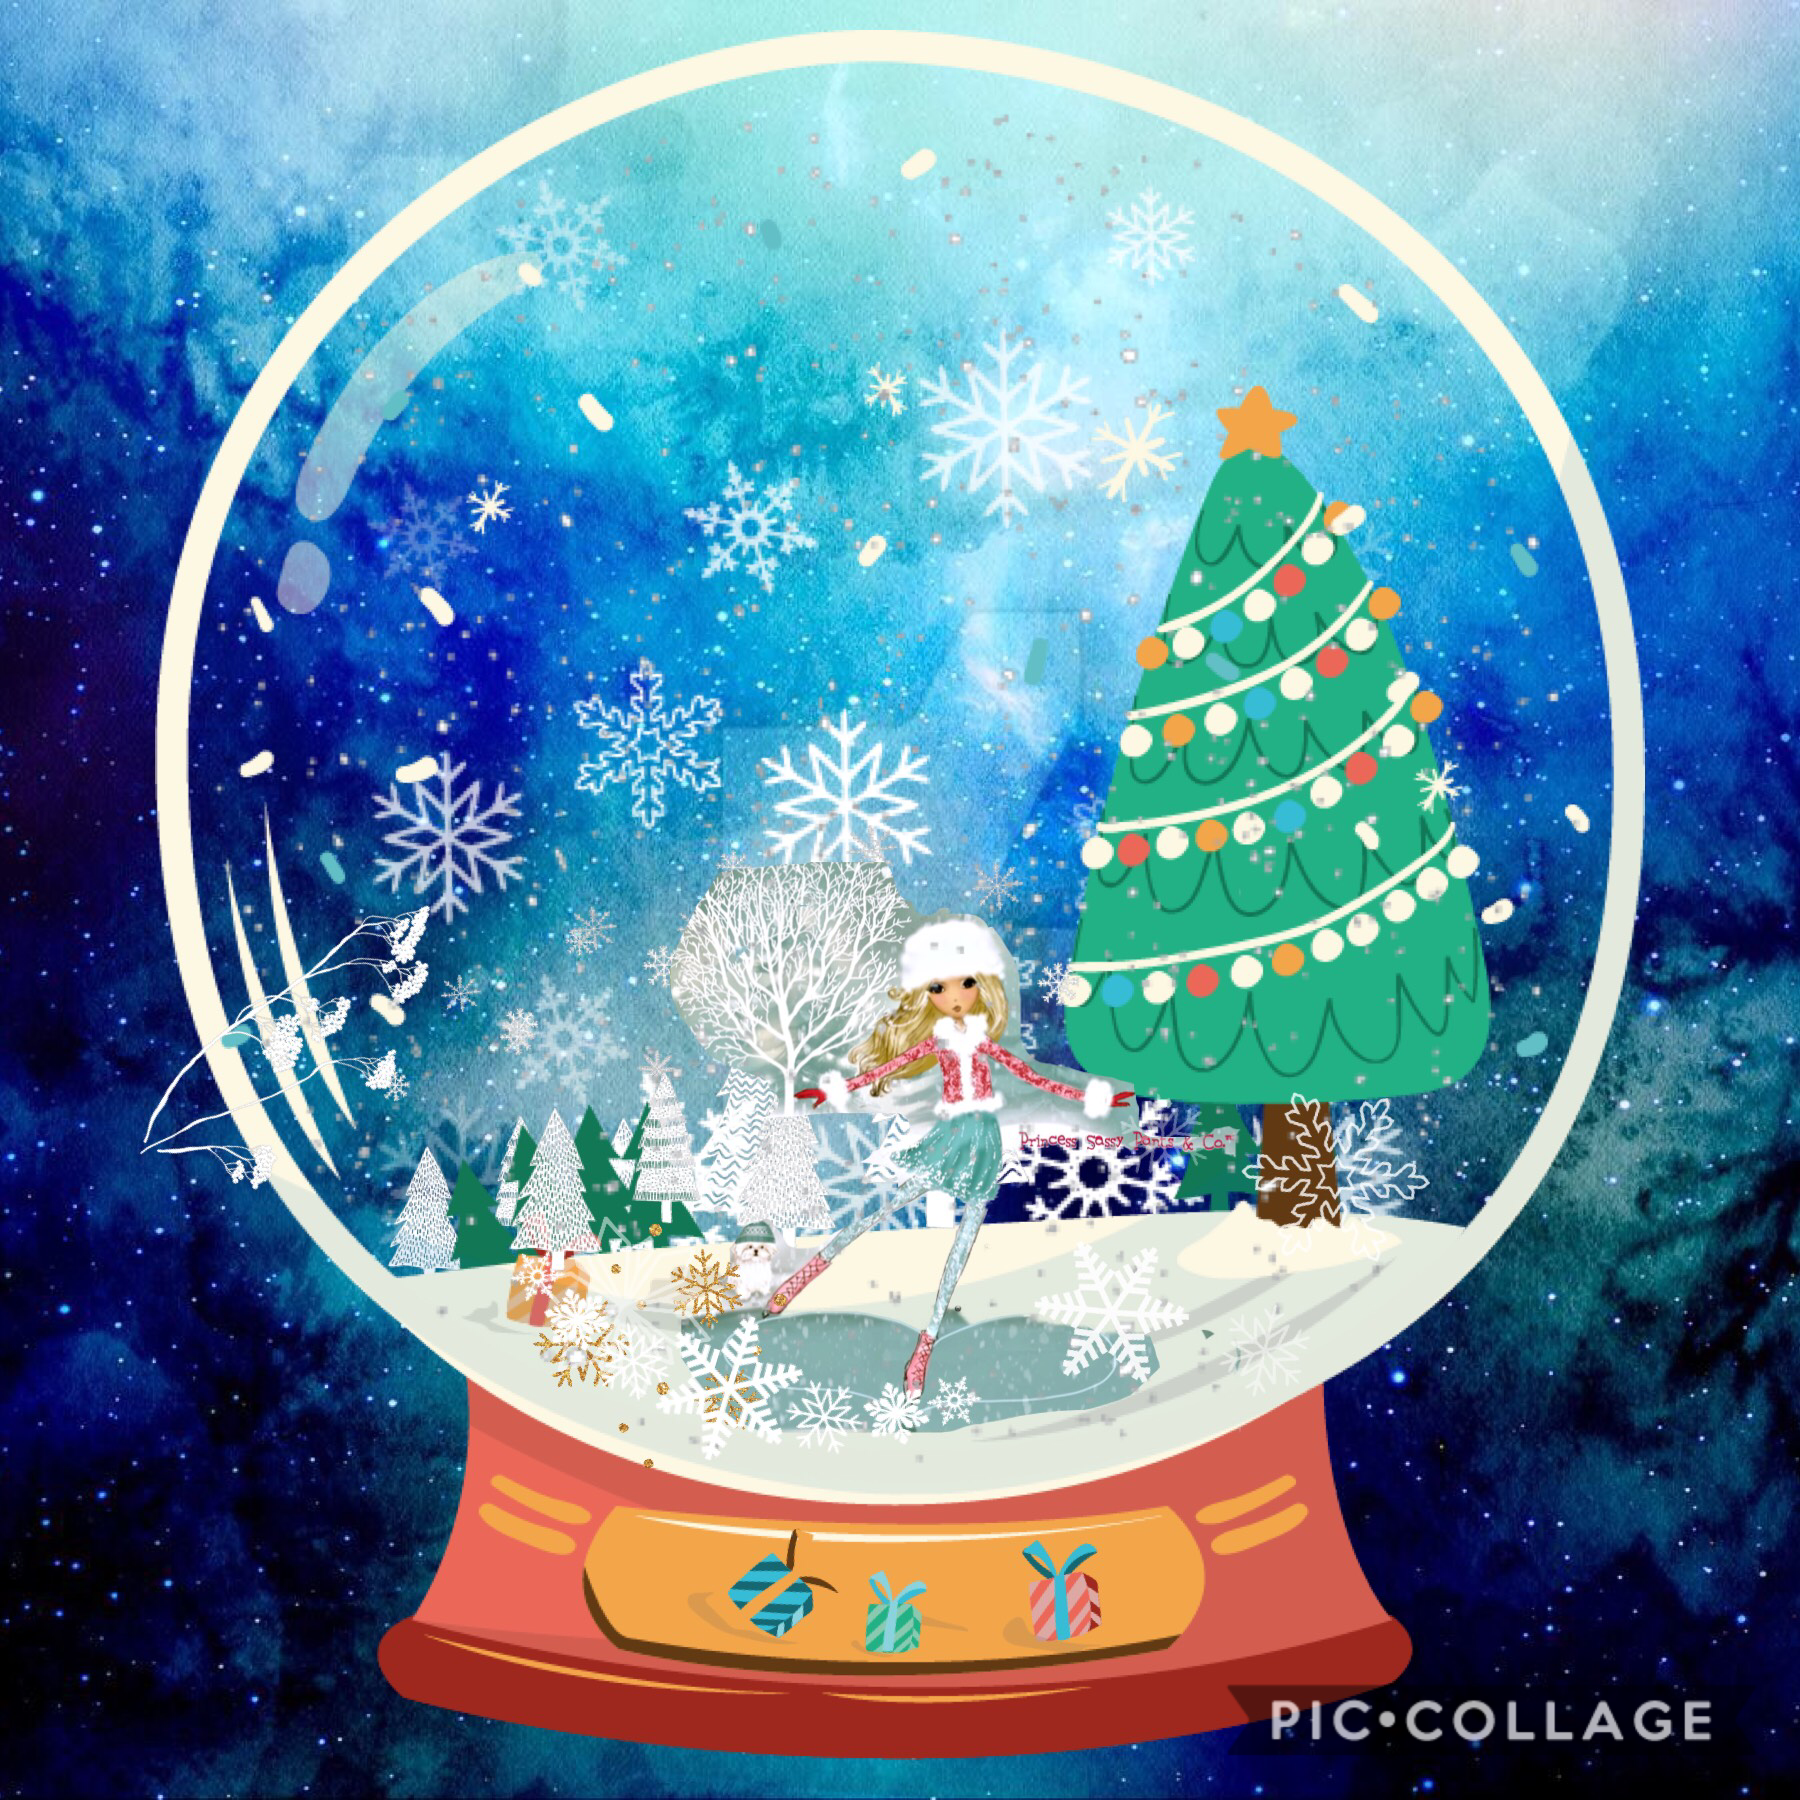 Snow Globe and an ice skater.
Just trying to test different pictures(Princess Sassy Pants) in this new Snow Globe background.